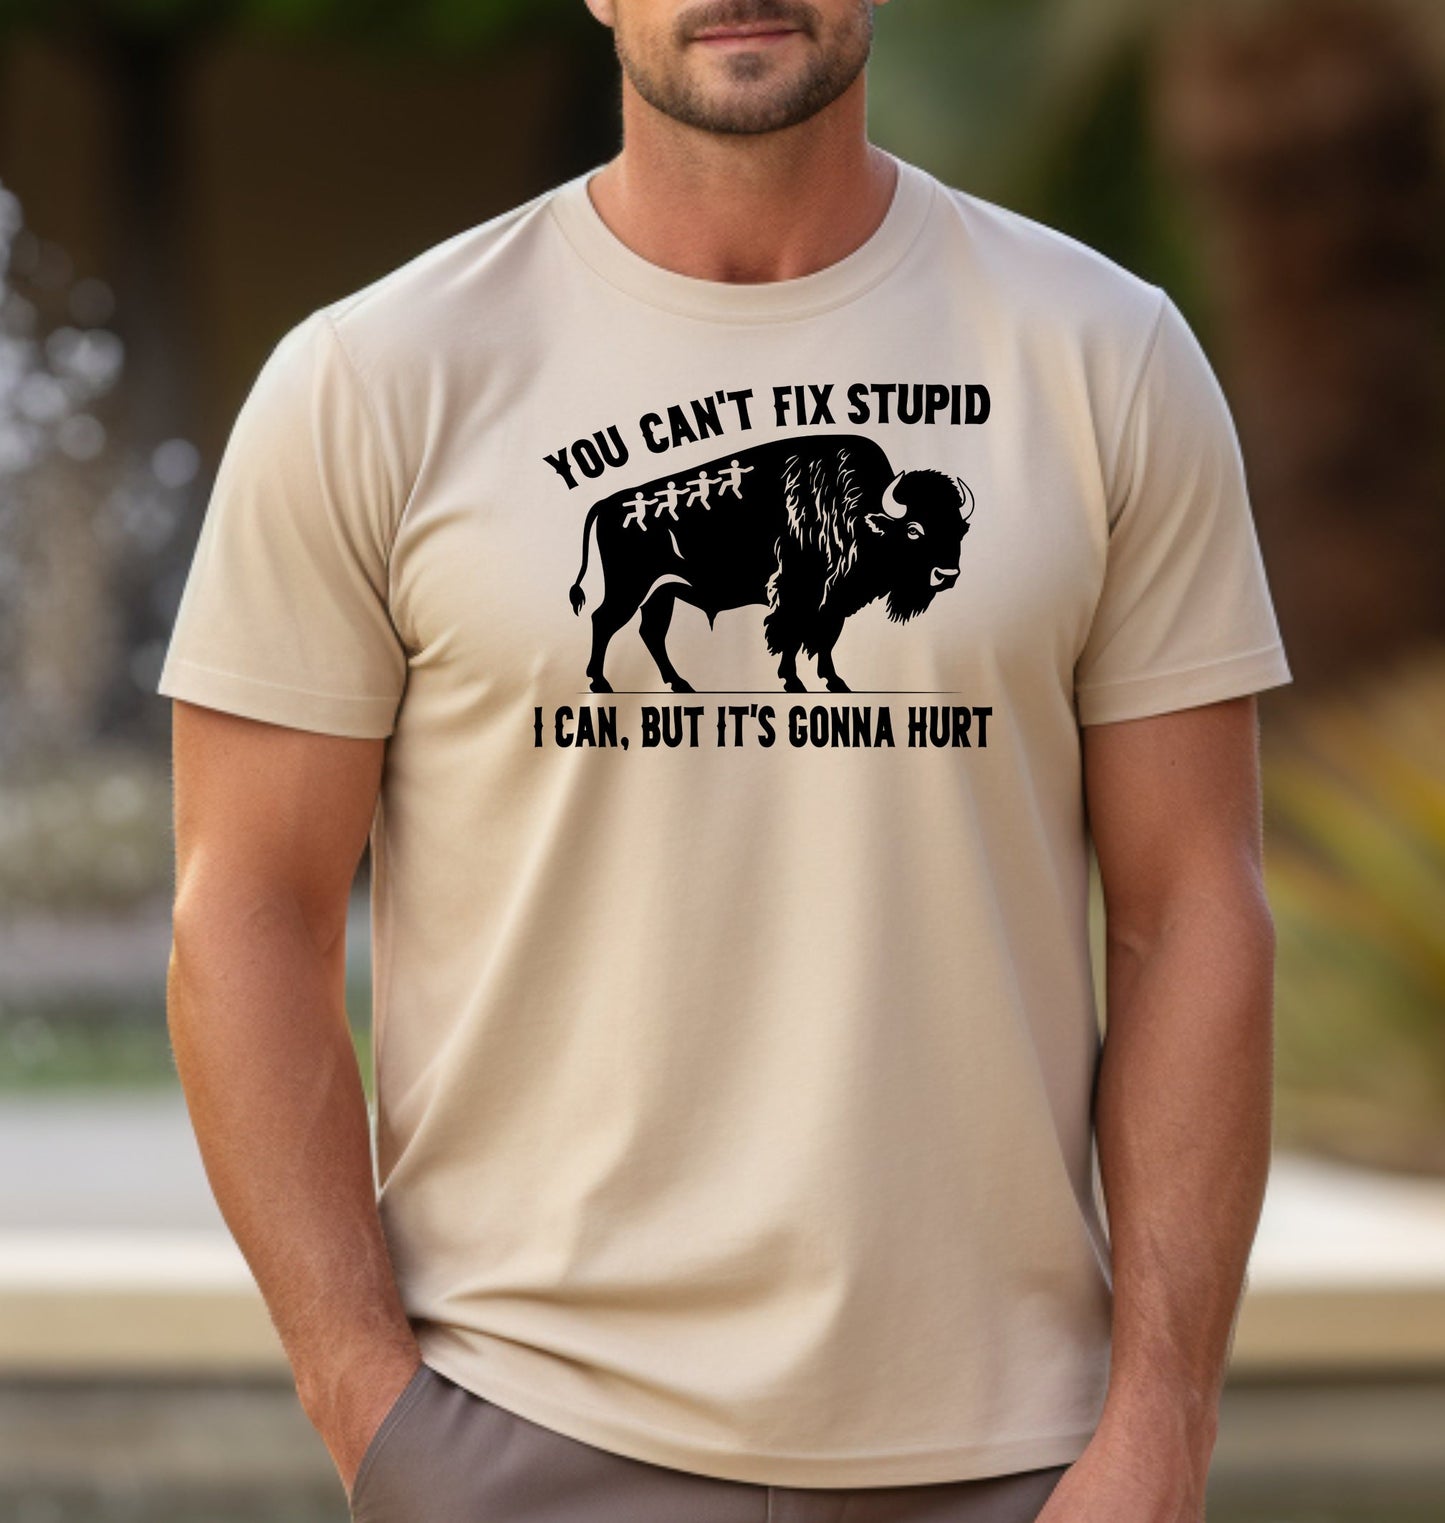 You Can't Fix Stupid. I Can, But it's Gonna Hurt. Adult Unisex Cotton T-Shirt